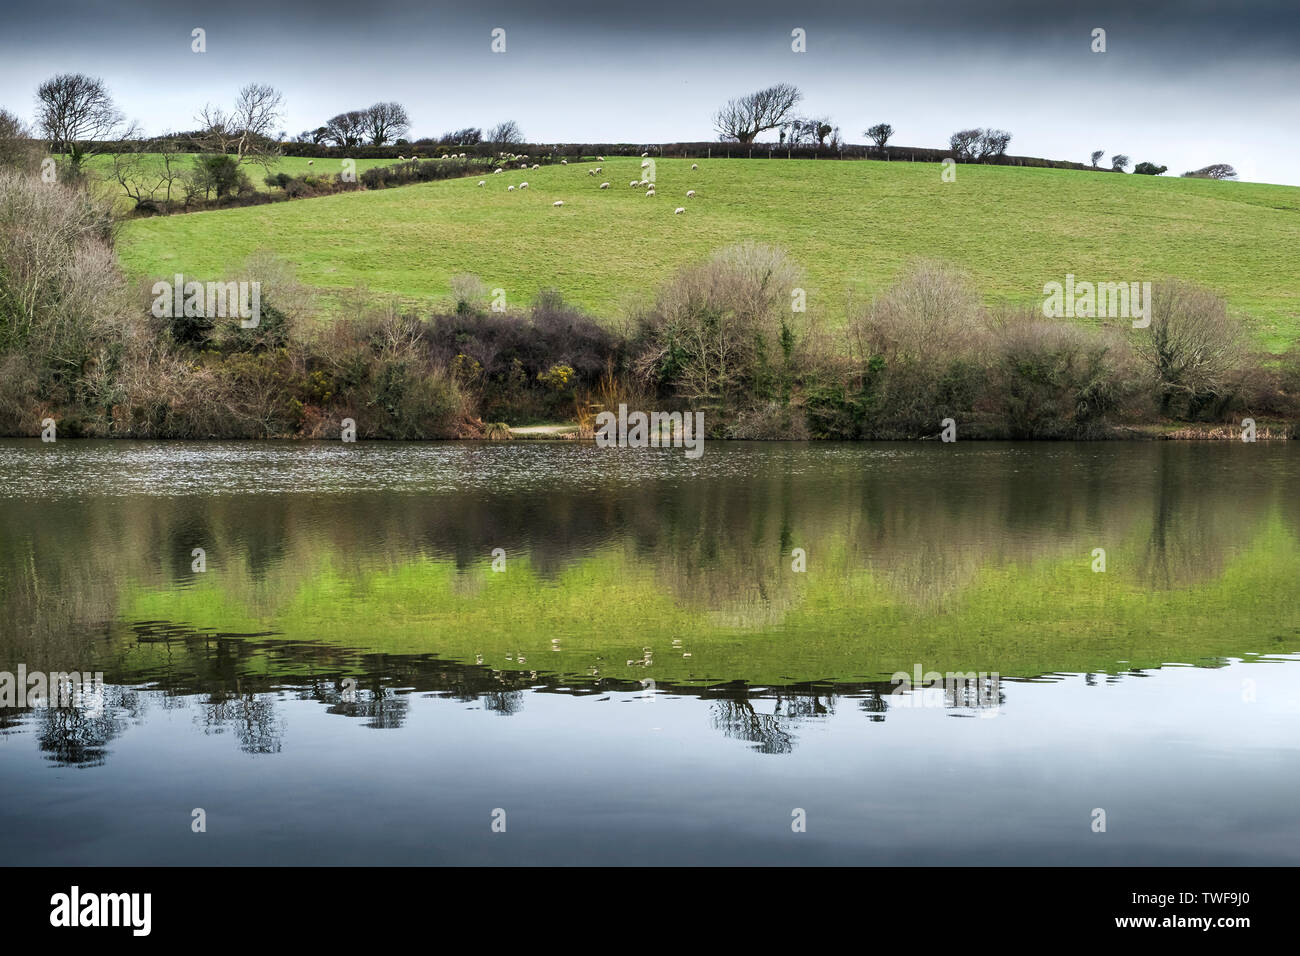 Reflection in the still water in Porth reservoir in Cornwall. Stock Photo